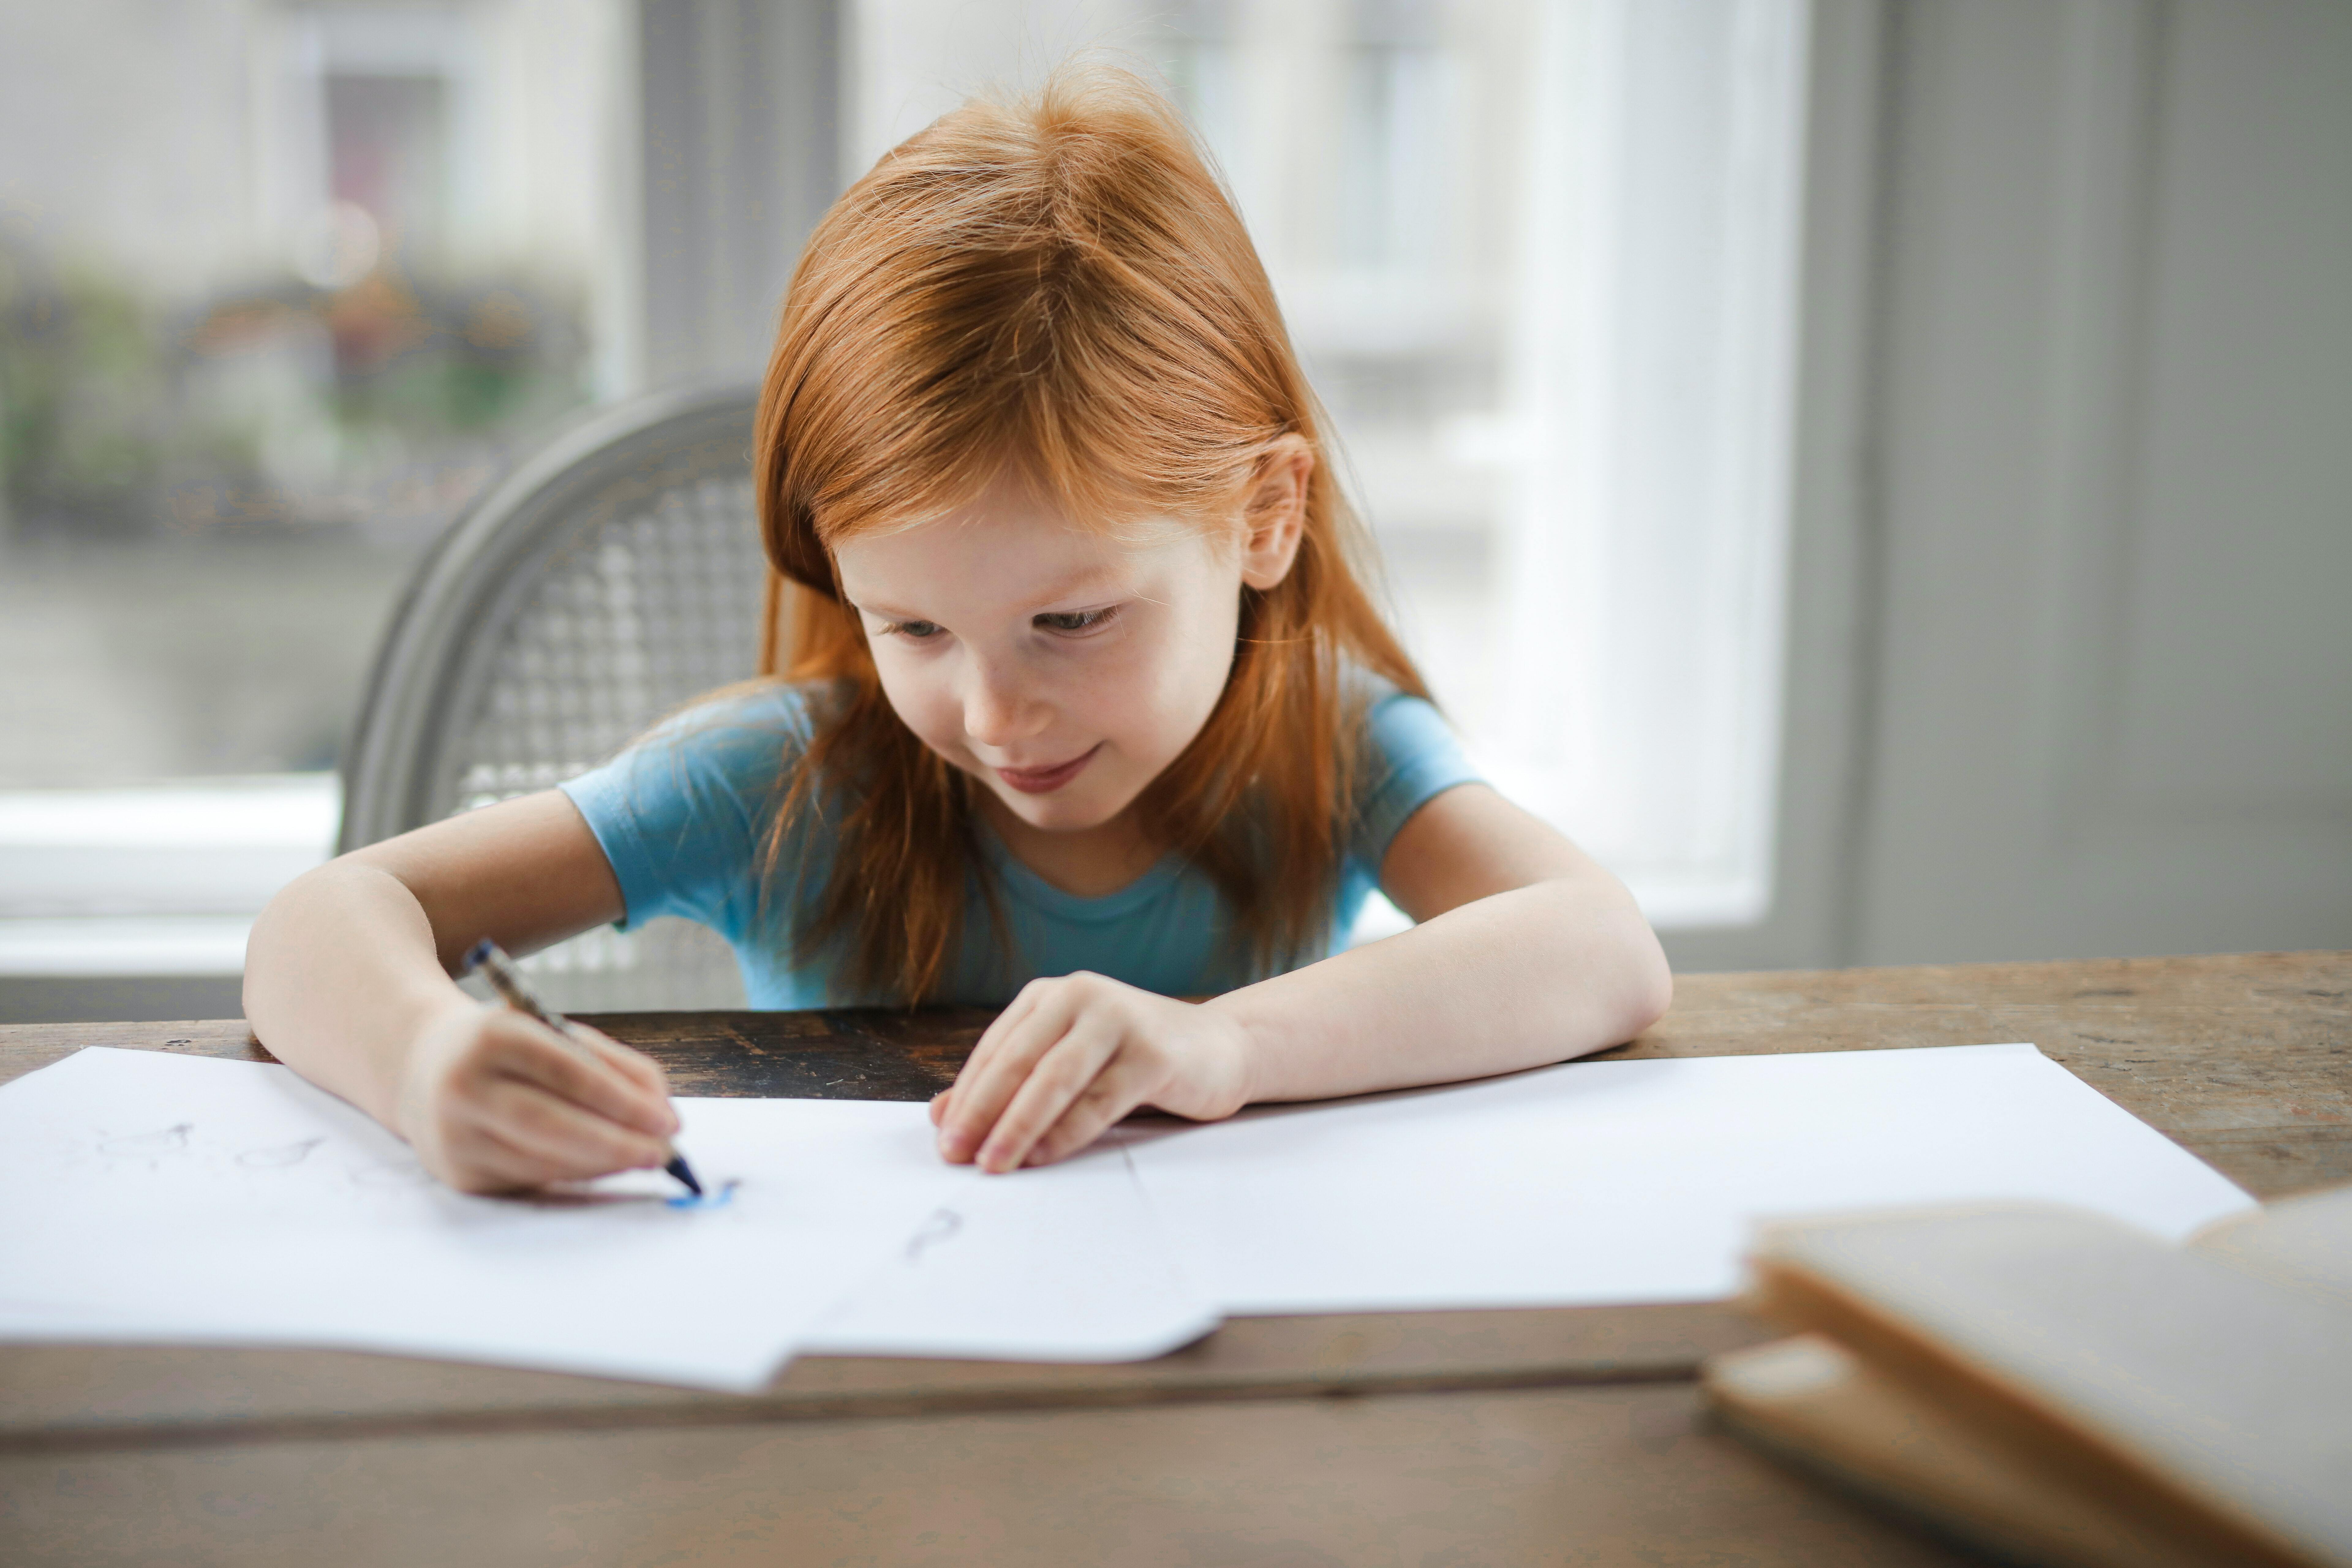 Child writing on a desk